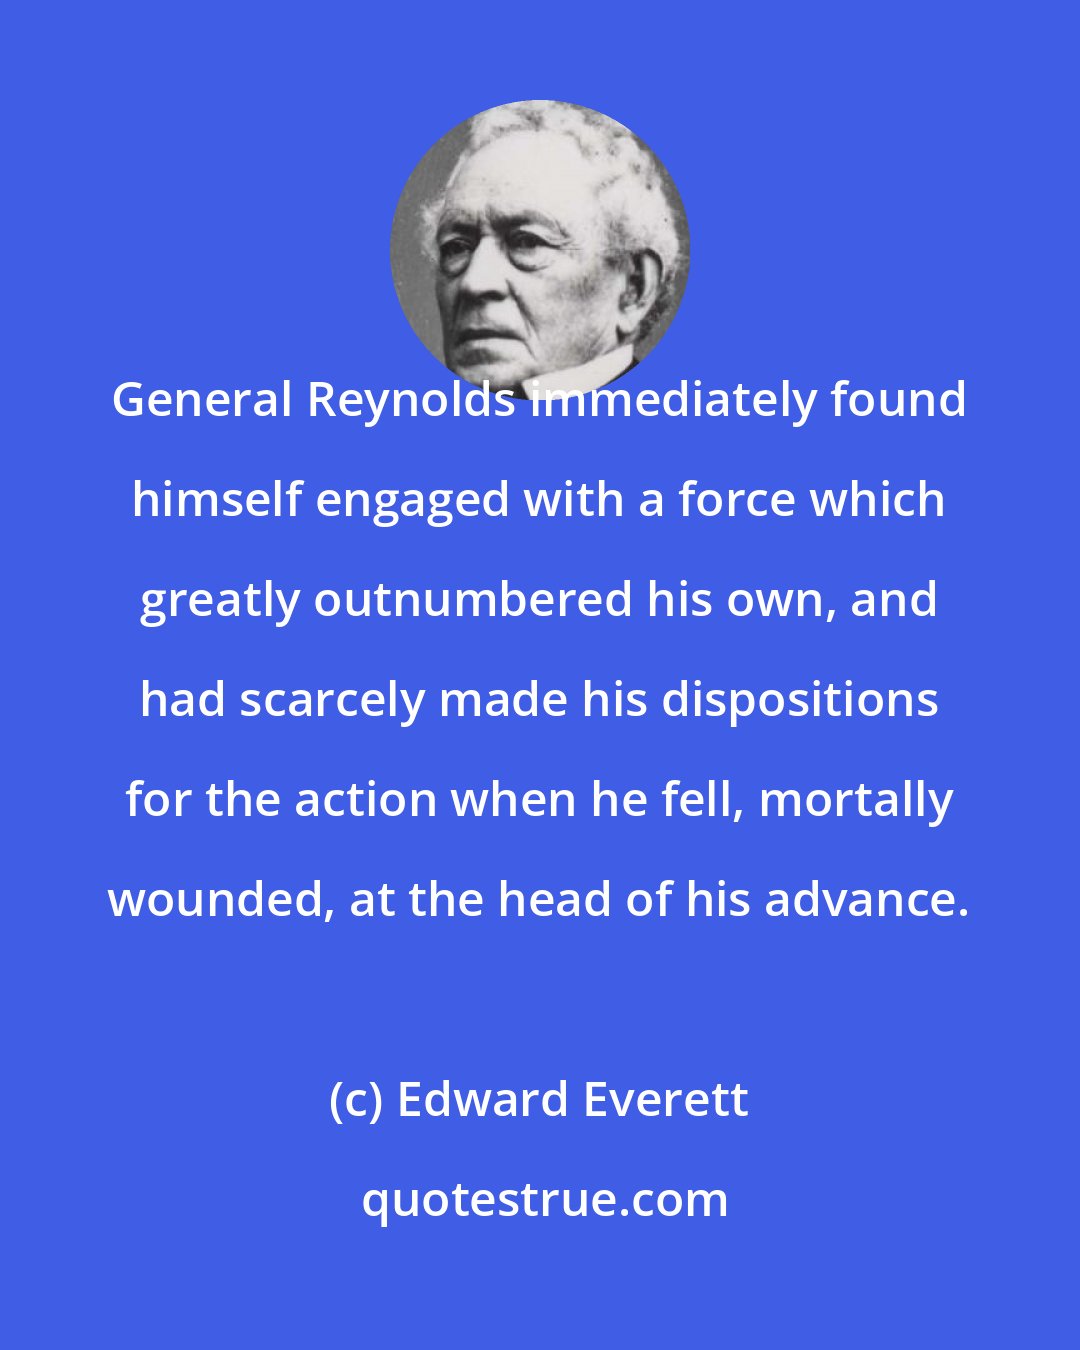 Edward Everett: General Reynolds immediately found himself engaged with a force which greatly outnumbered his own, and had scarcely made his dispositions for the action when he fell, mortally wounded, at the head of his advance.